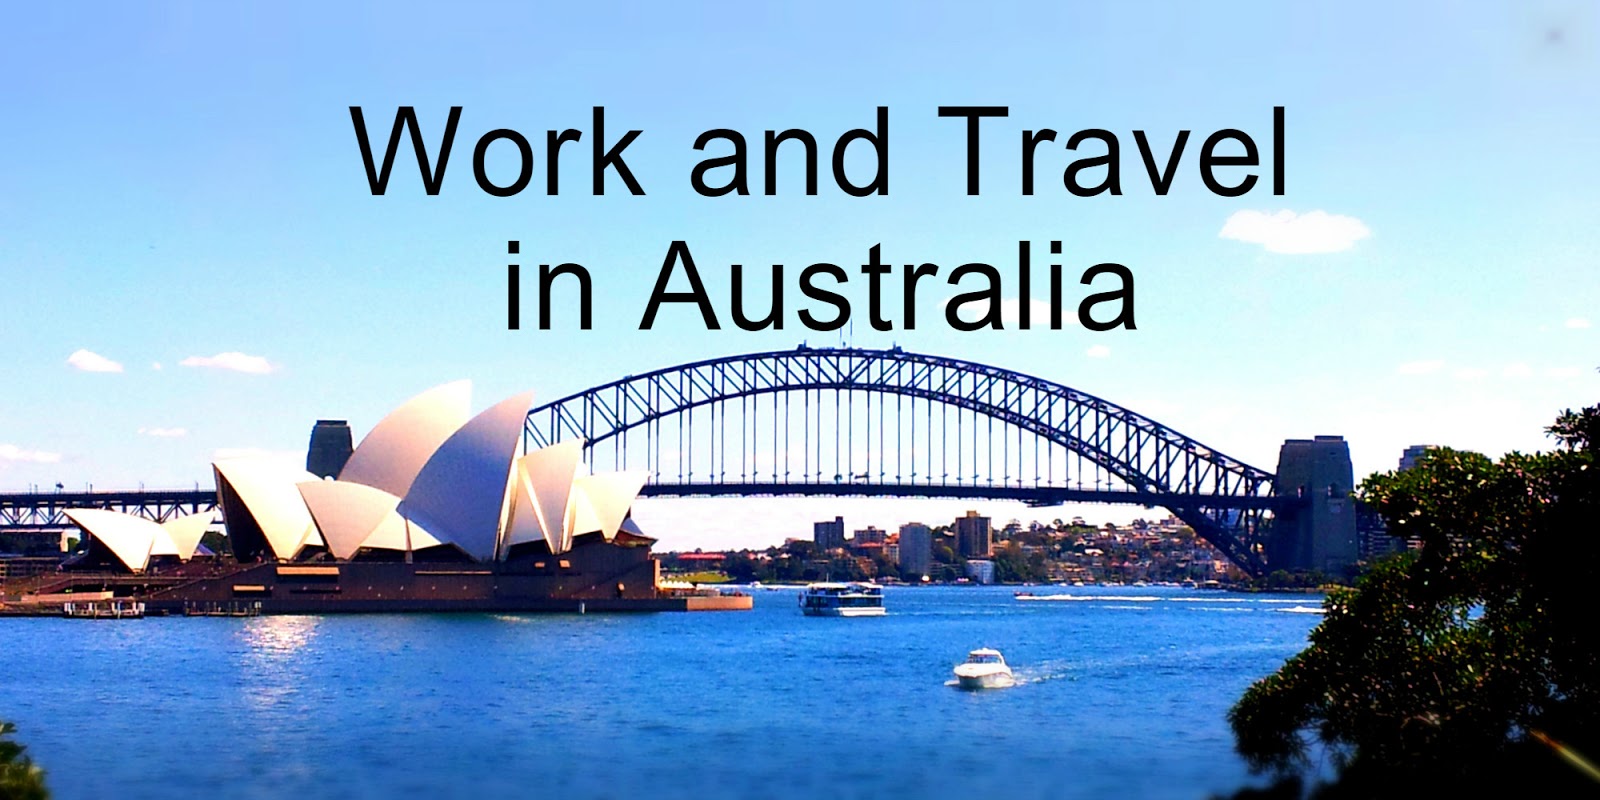 work and travel australia government